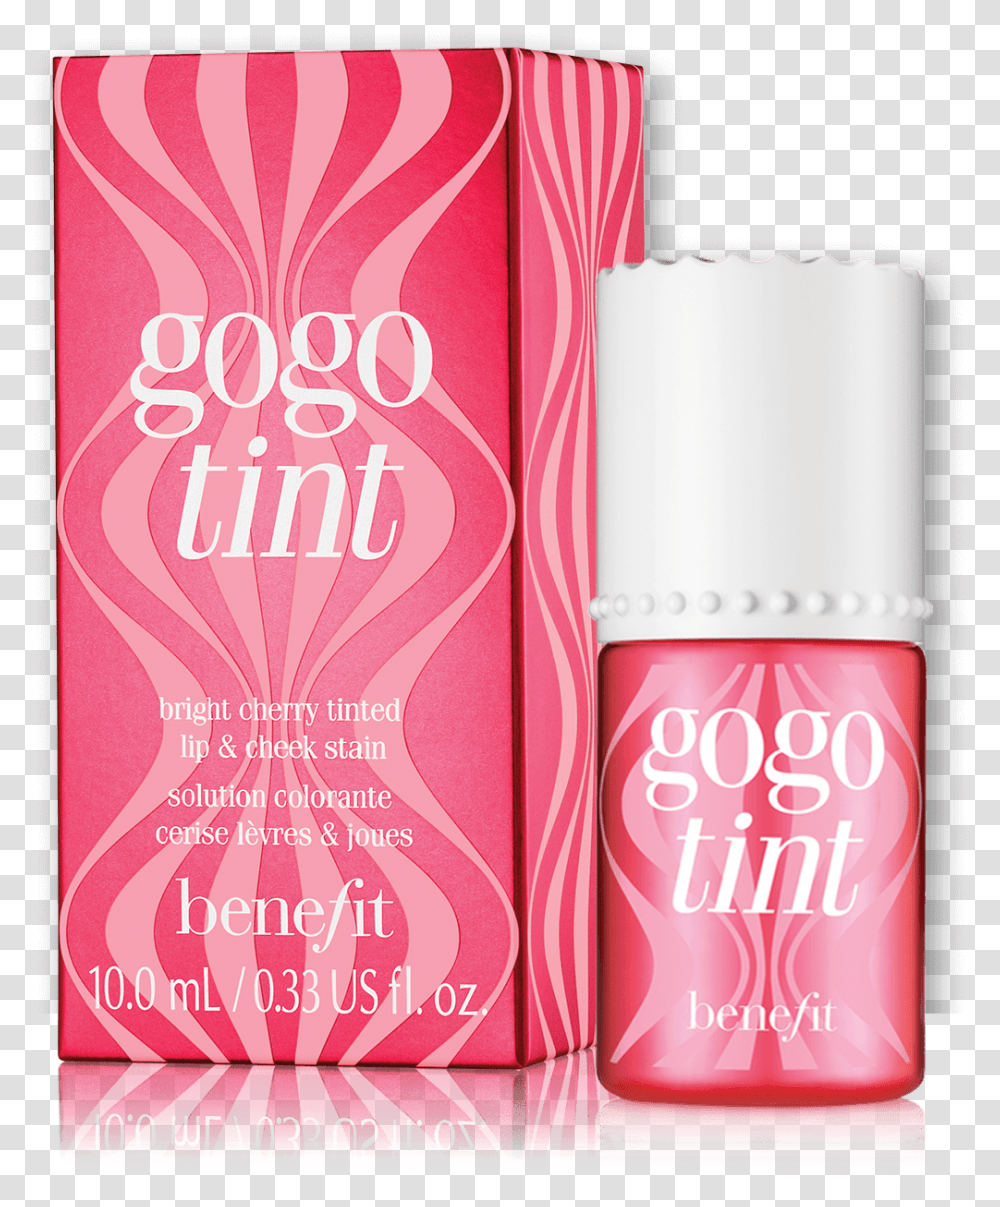 No Touch Ups Required With Gogotint Our Super Bright, Cosmetics, Bottle, Perfume, Deodorant Transparent Png